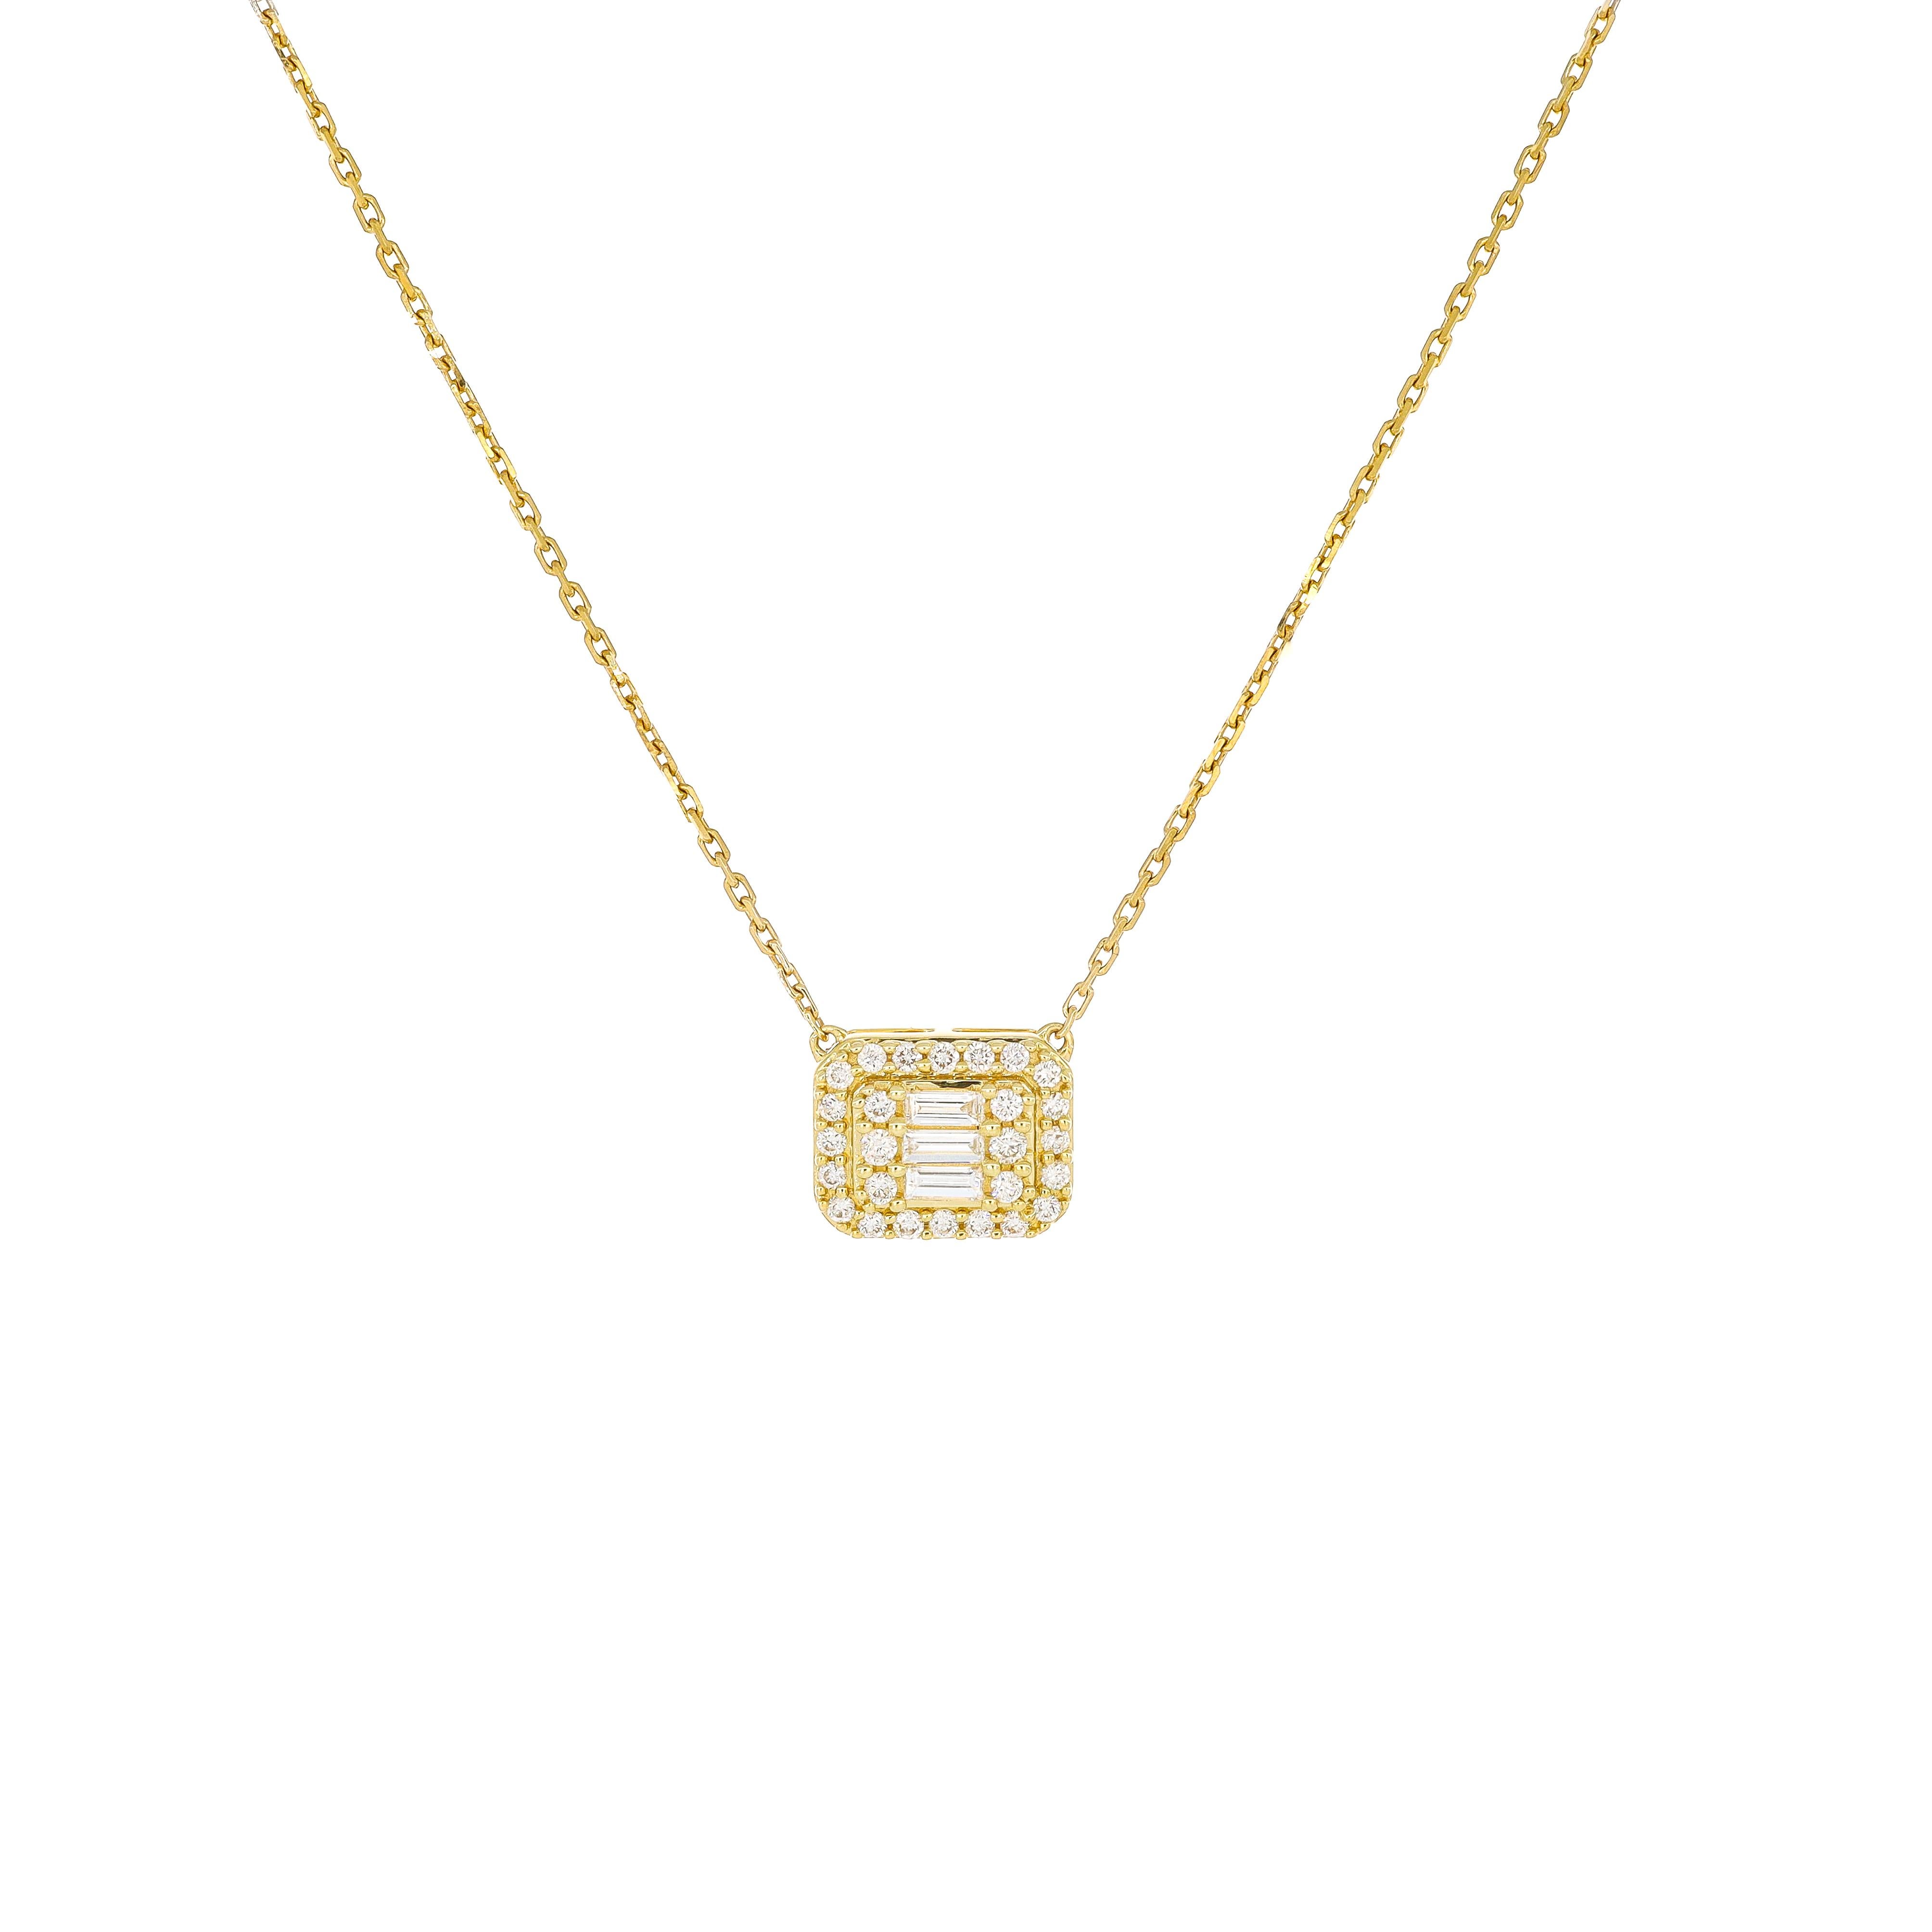 At its core, the pendant showcases a captivating cluster of baguette and round diamonds, meticulously arranged to create a stunning visual impact. The interplay of shapes and cuts adds depth and dimension to the design, while the brilliance of the